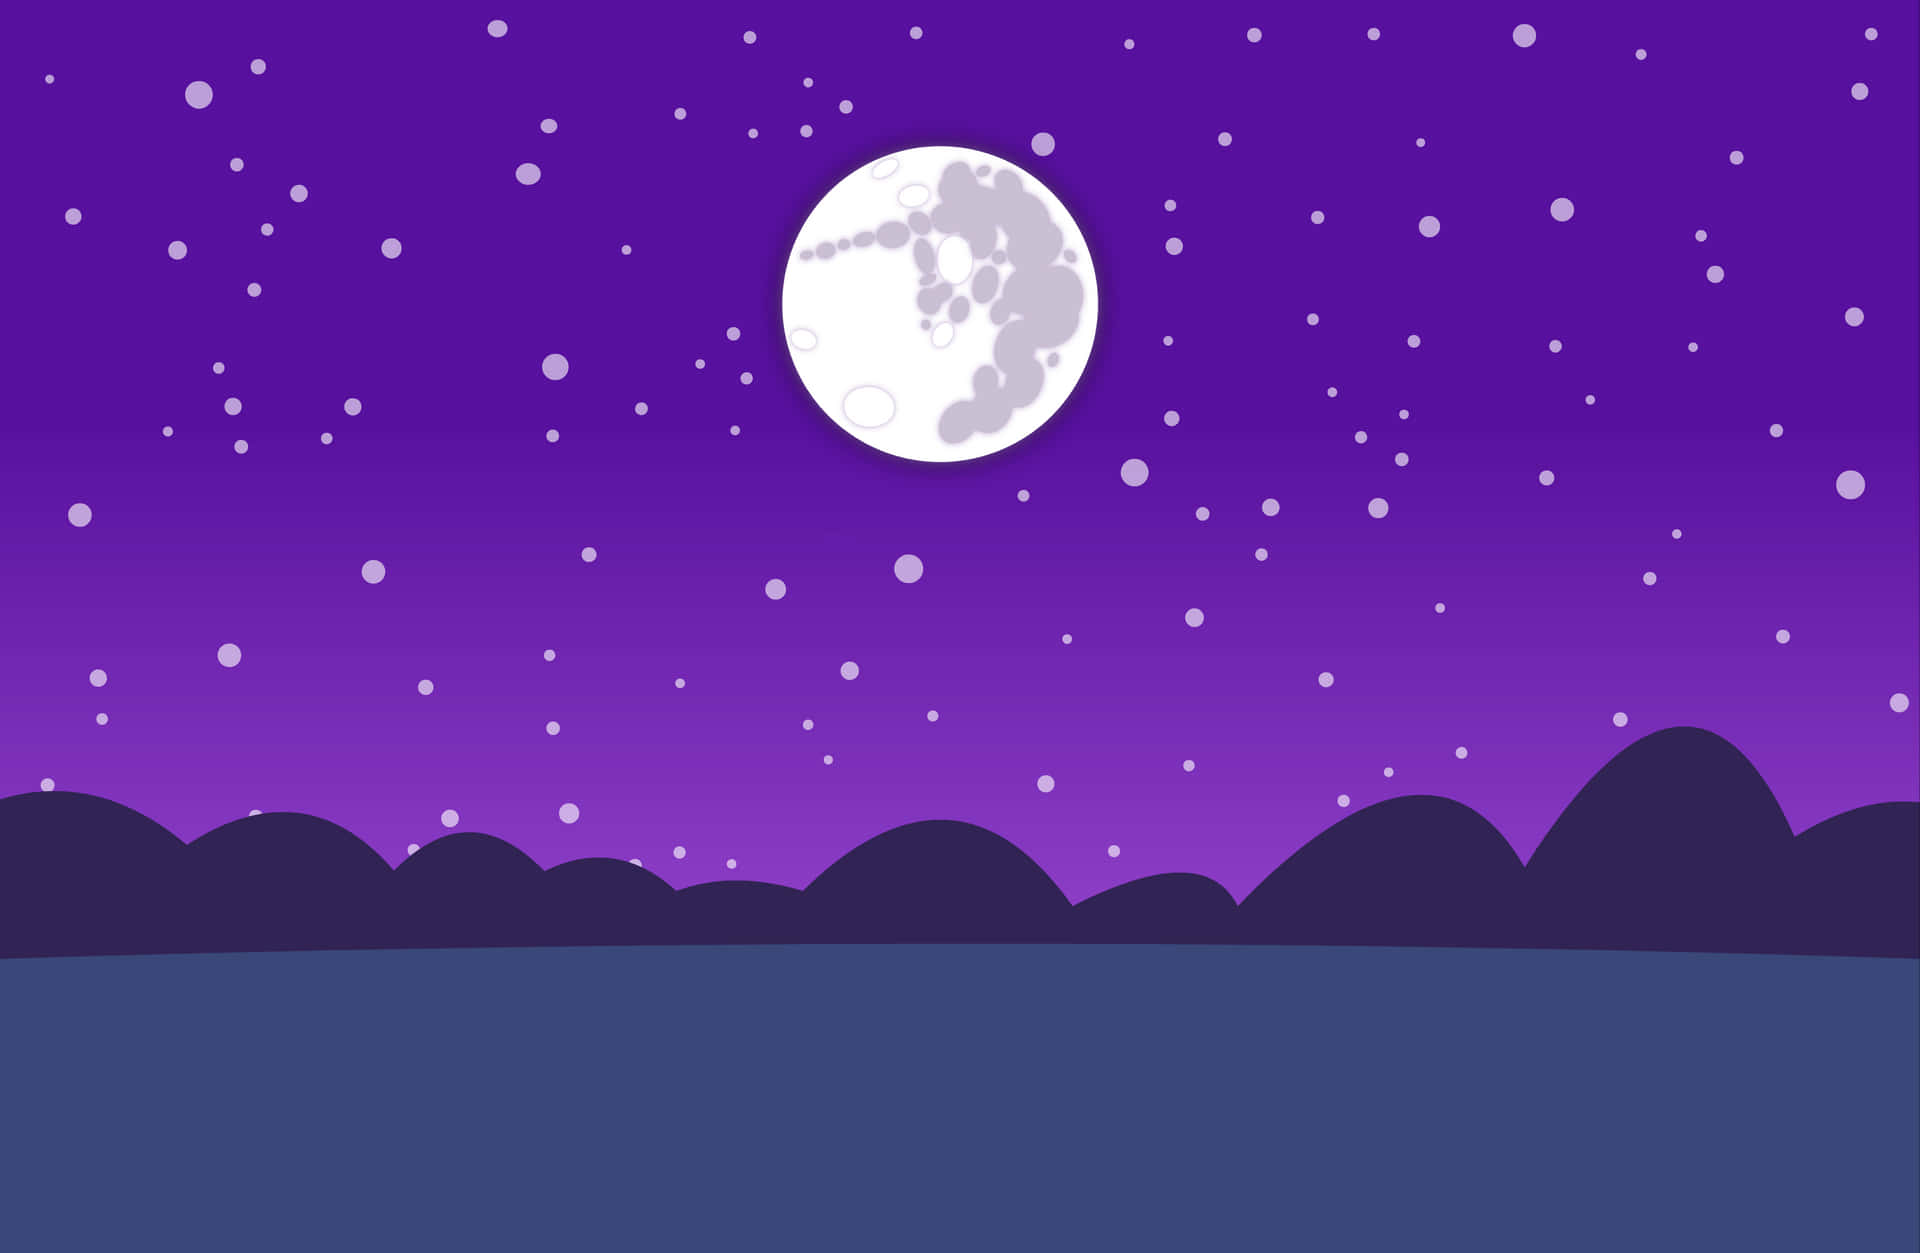 A Purple Night Sky With A Full Moon And Stars